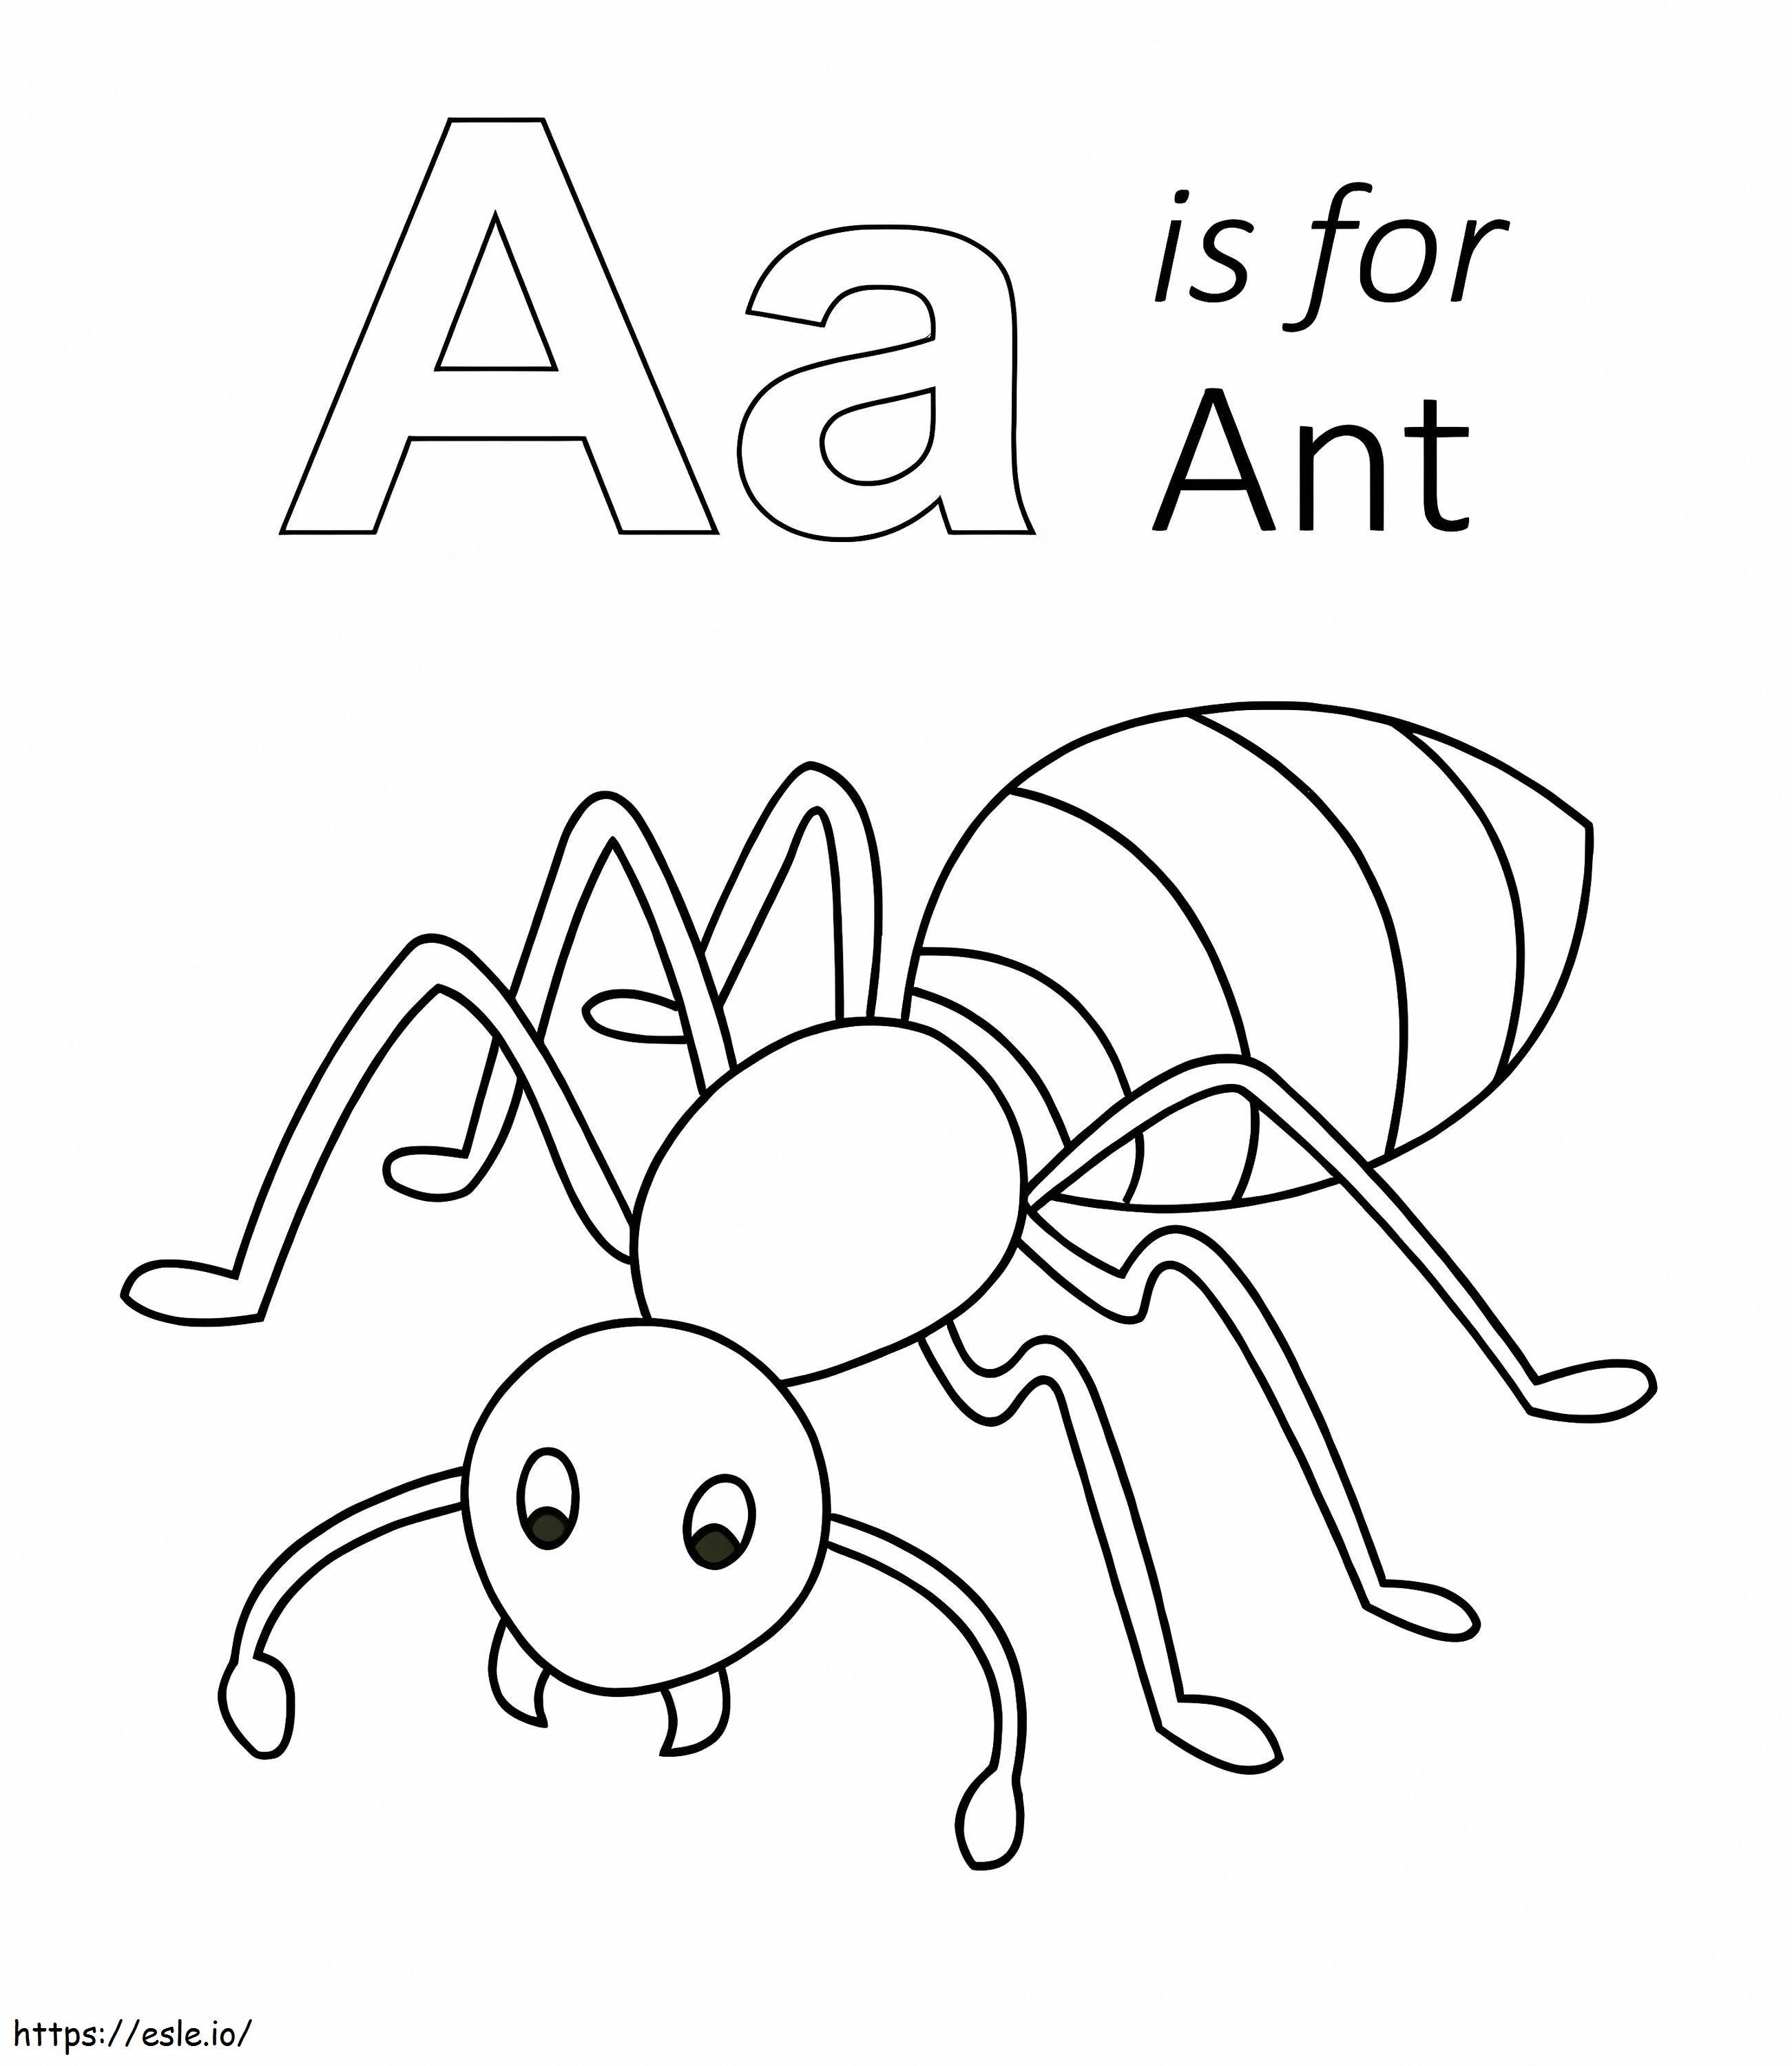 The Letter A Is For The Ant coloring page